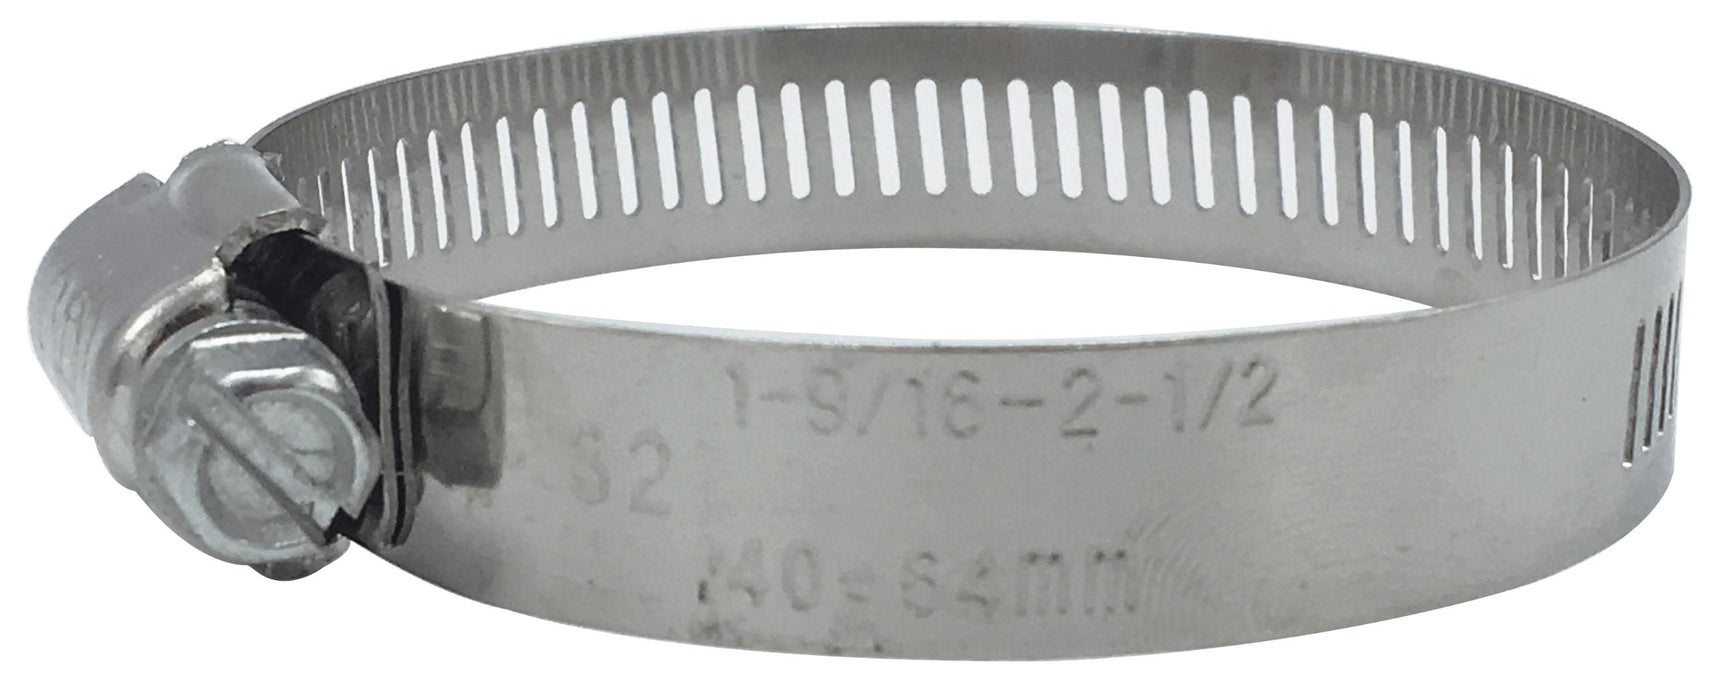 #28 Stainless Hose Clamp With Carbon Screw